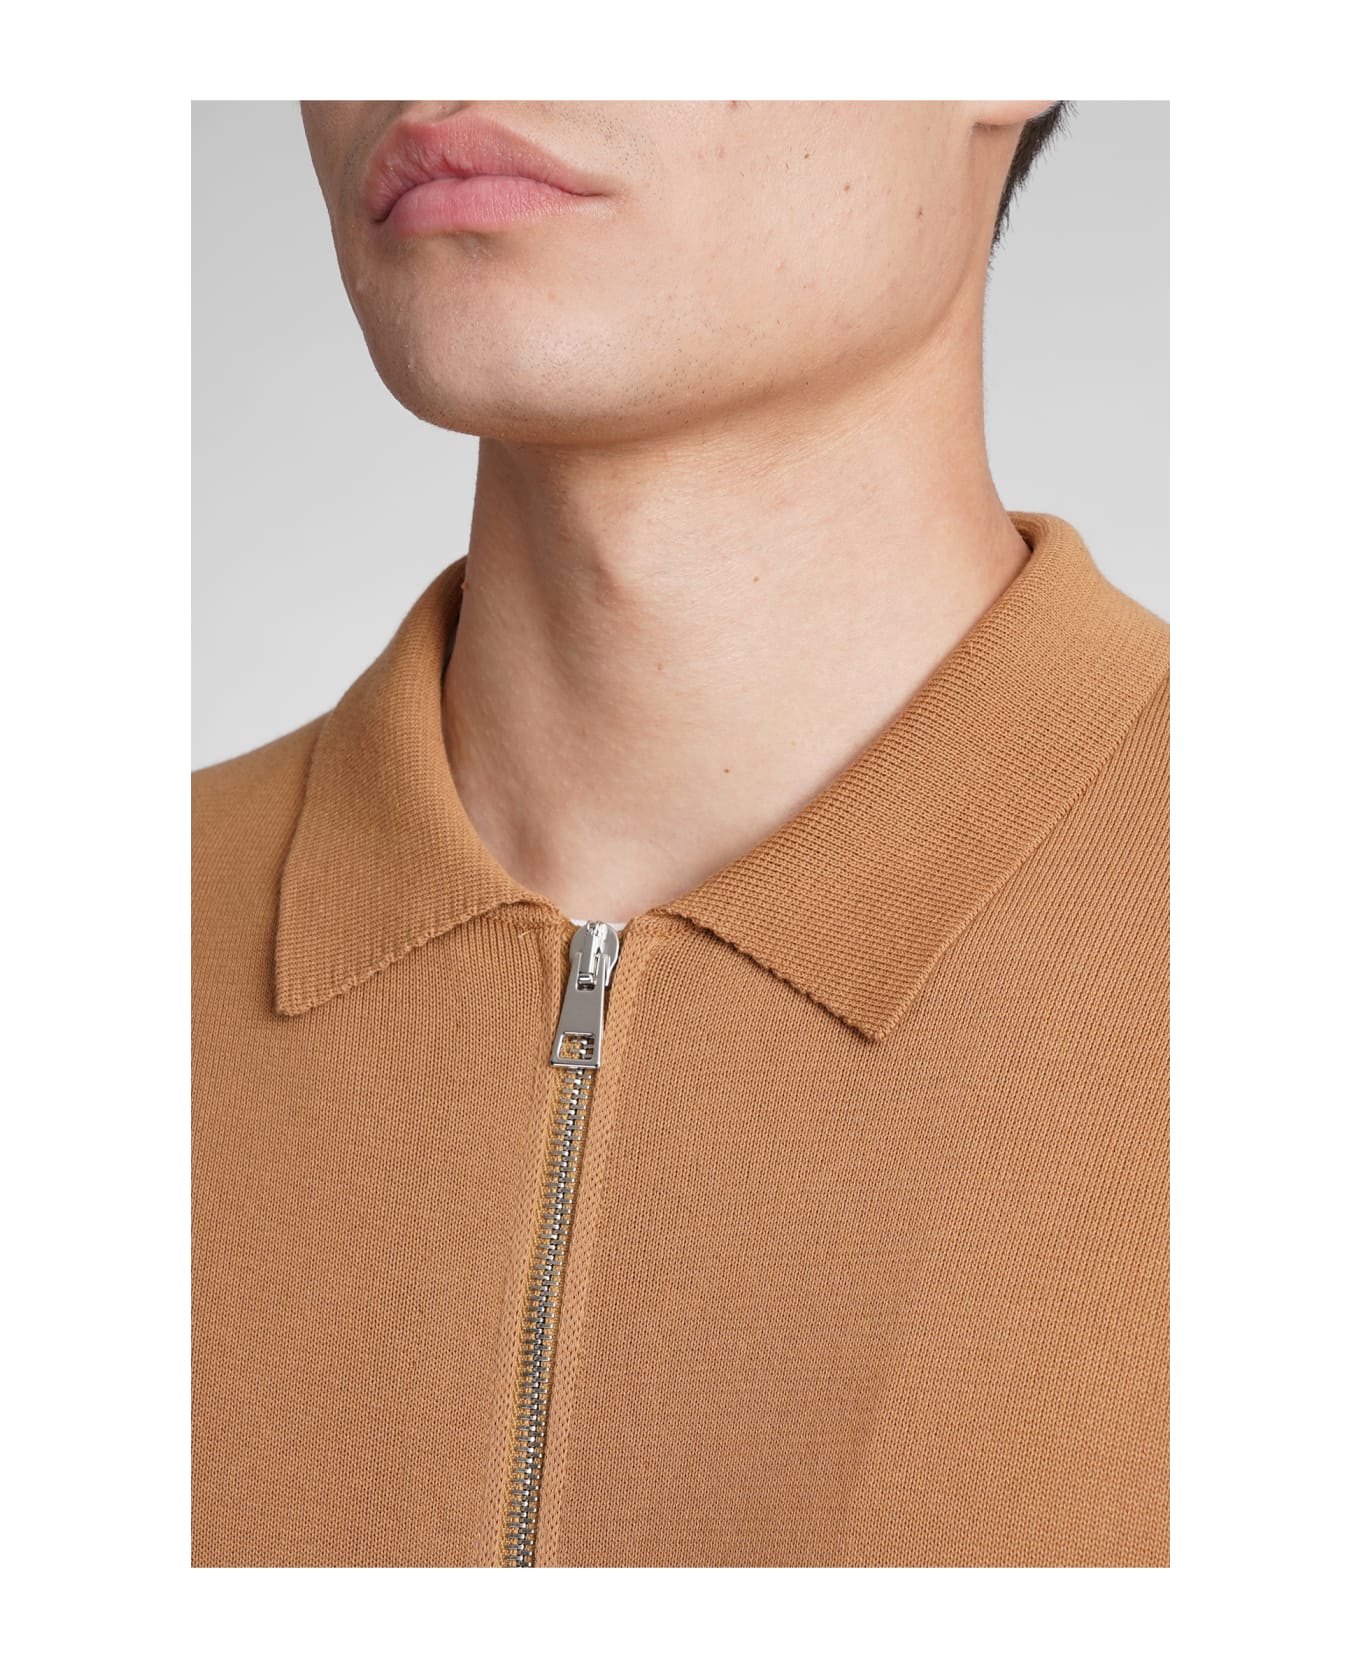 Roberto Collina Shirt In Leather Color Cotton - SAND